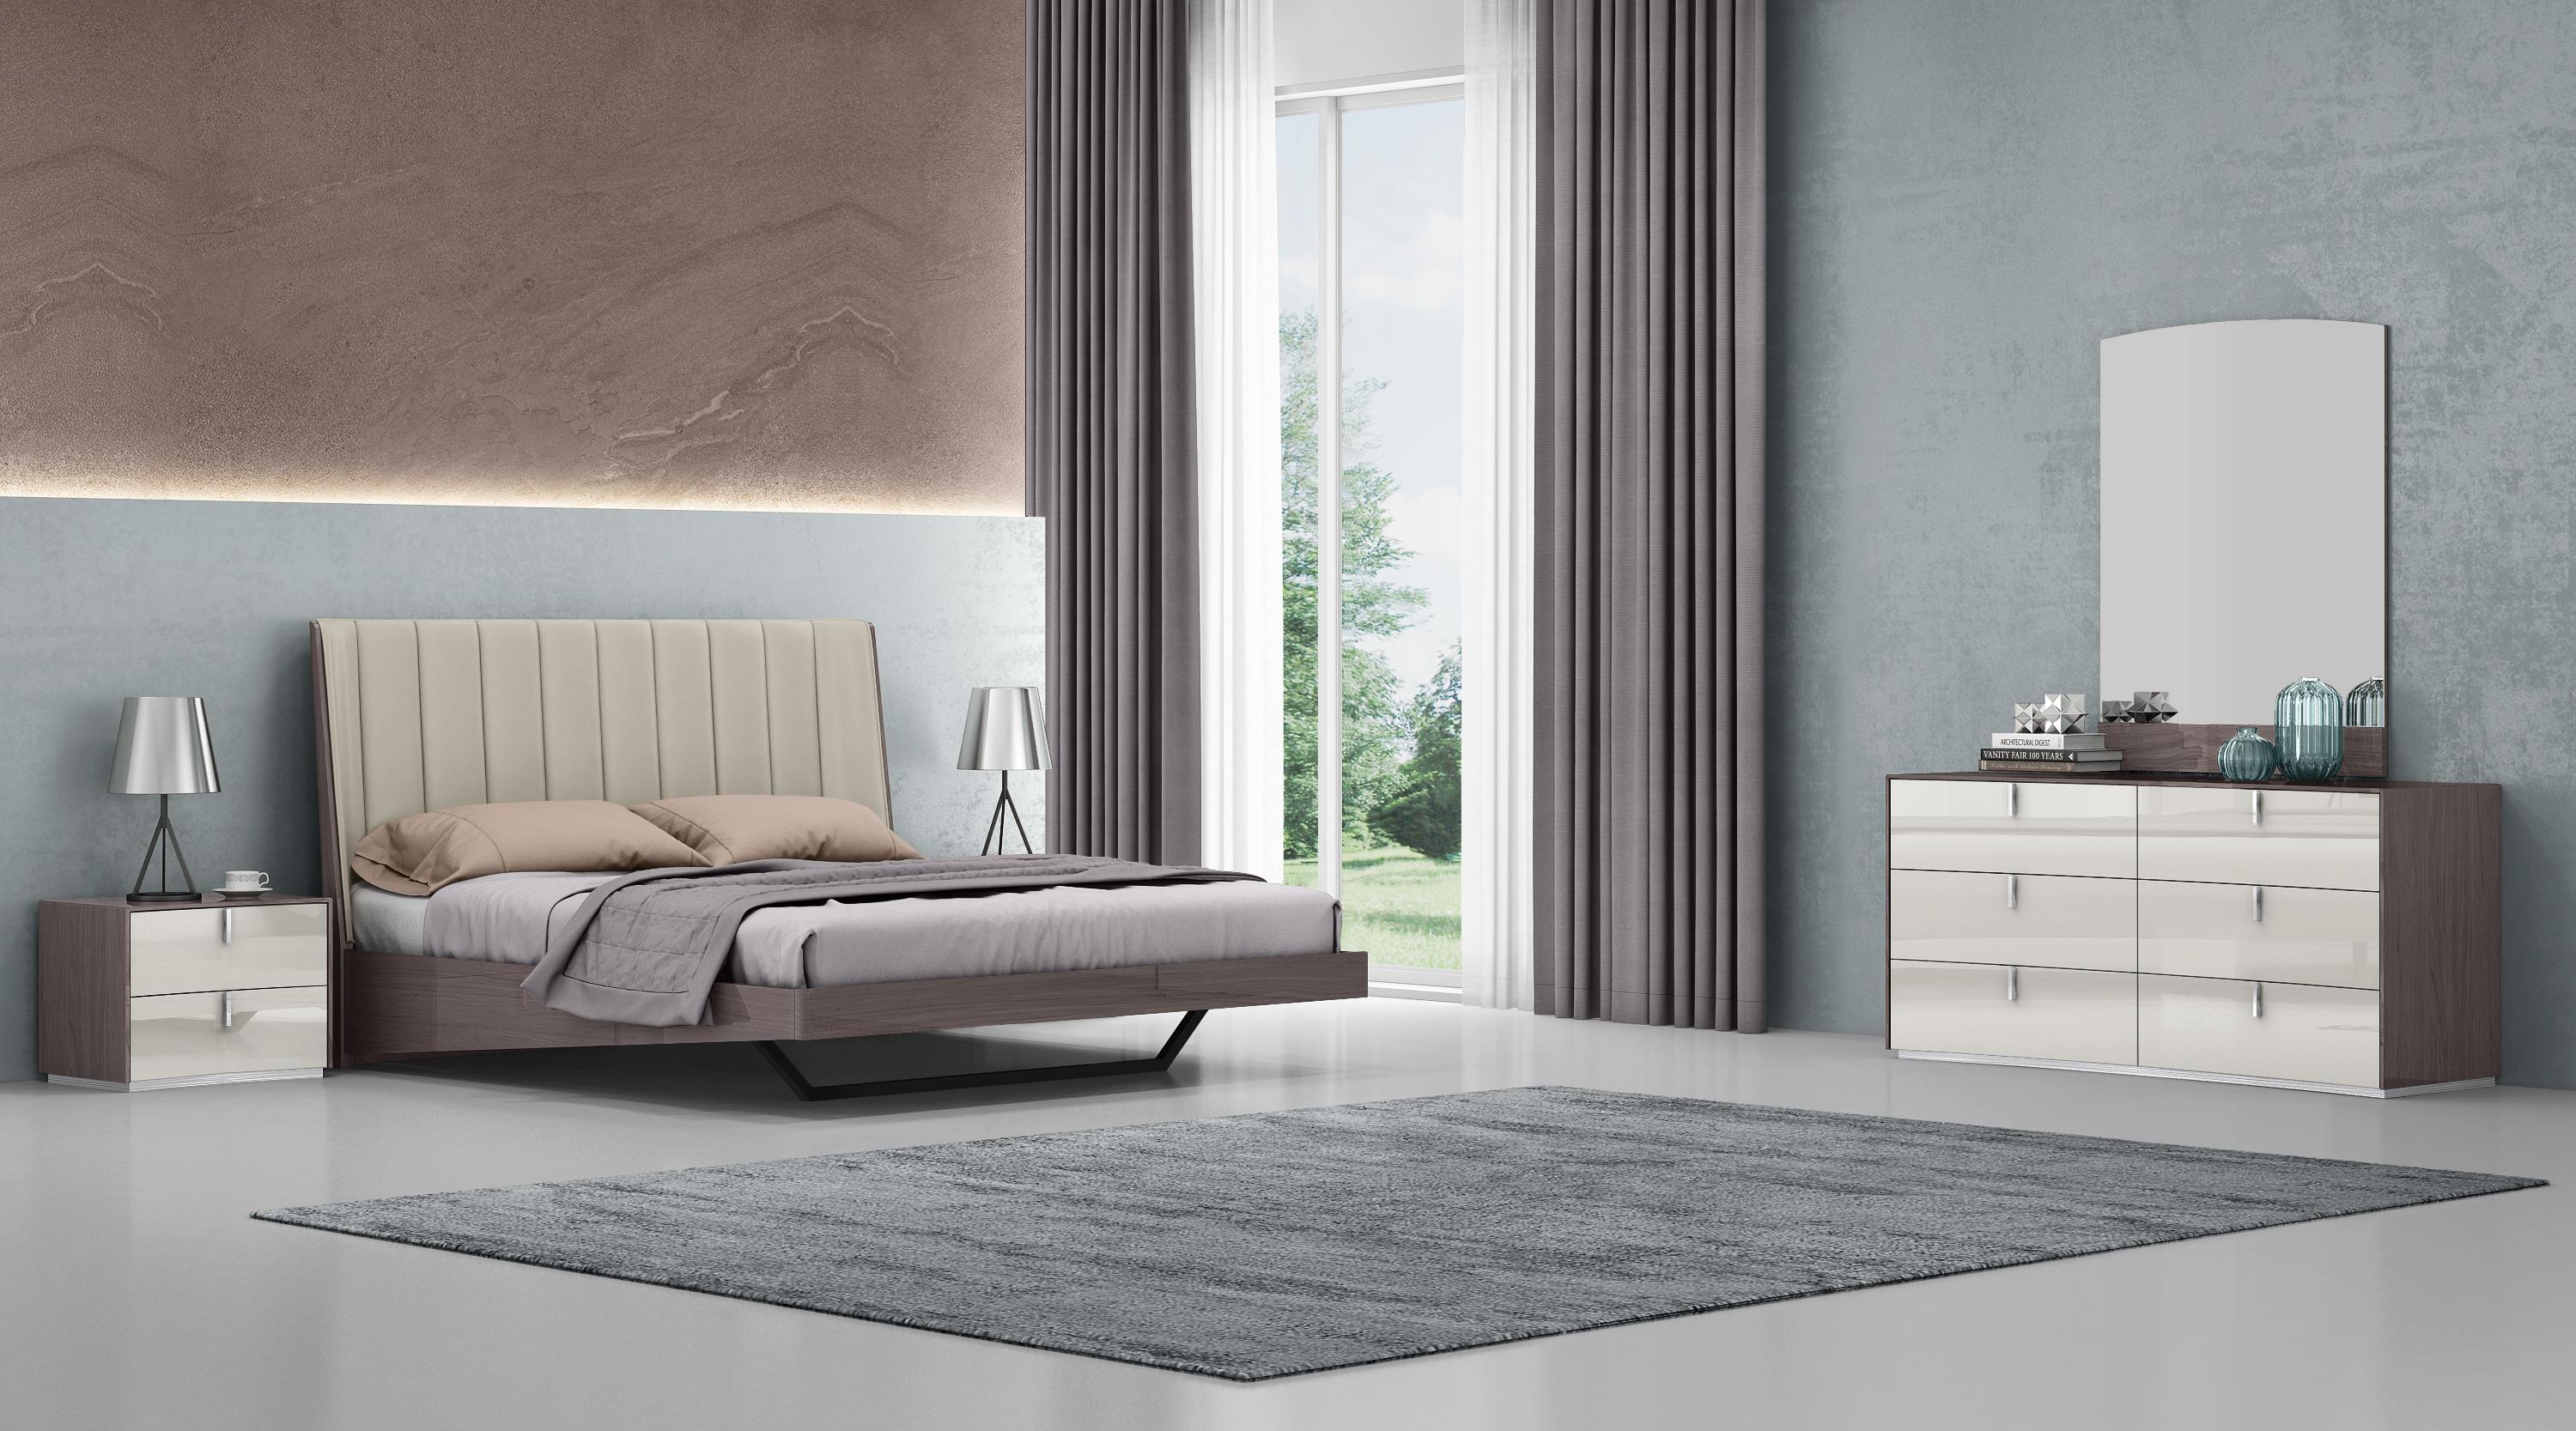 Contemporary Bedroom Set BK1754-GRY/LGRY-5PC Berlin BK1754-GRY/LGRY-5PC in Light Gray Faux Leather